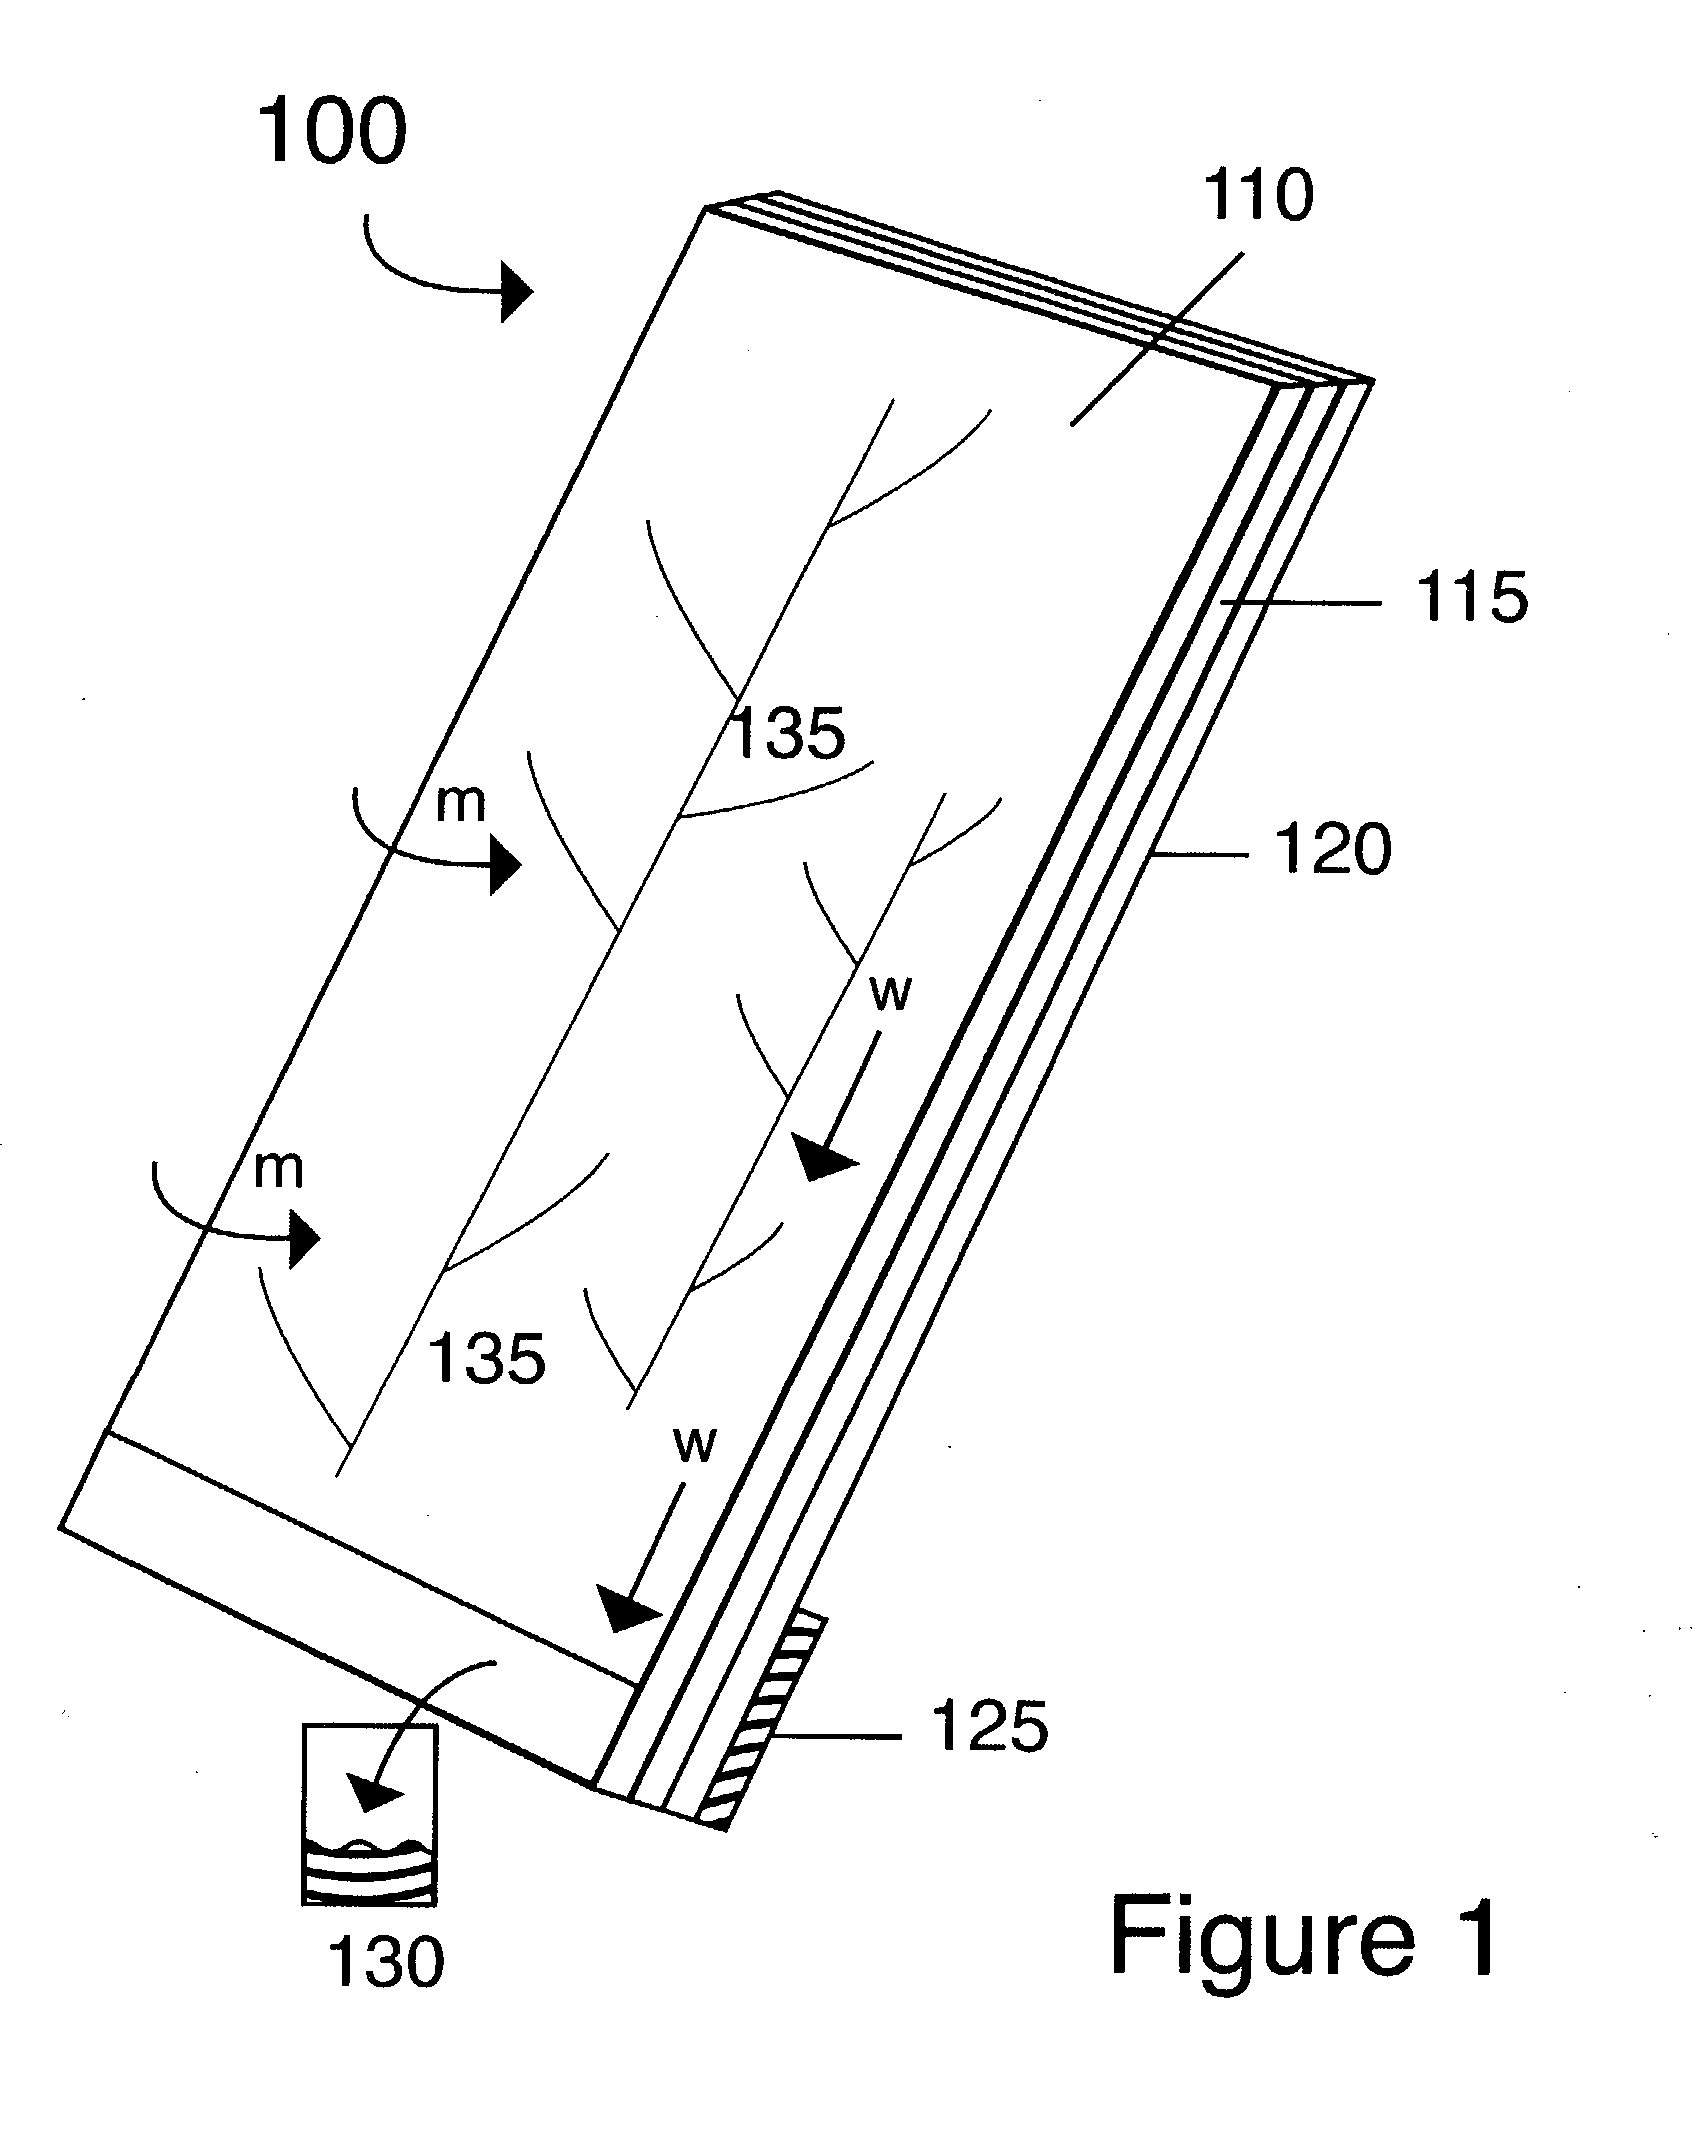 Apparatus and method for harvesting atmospheric moisture